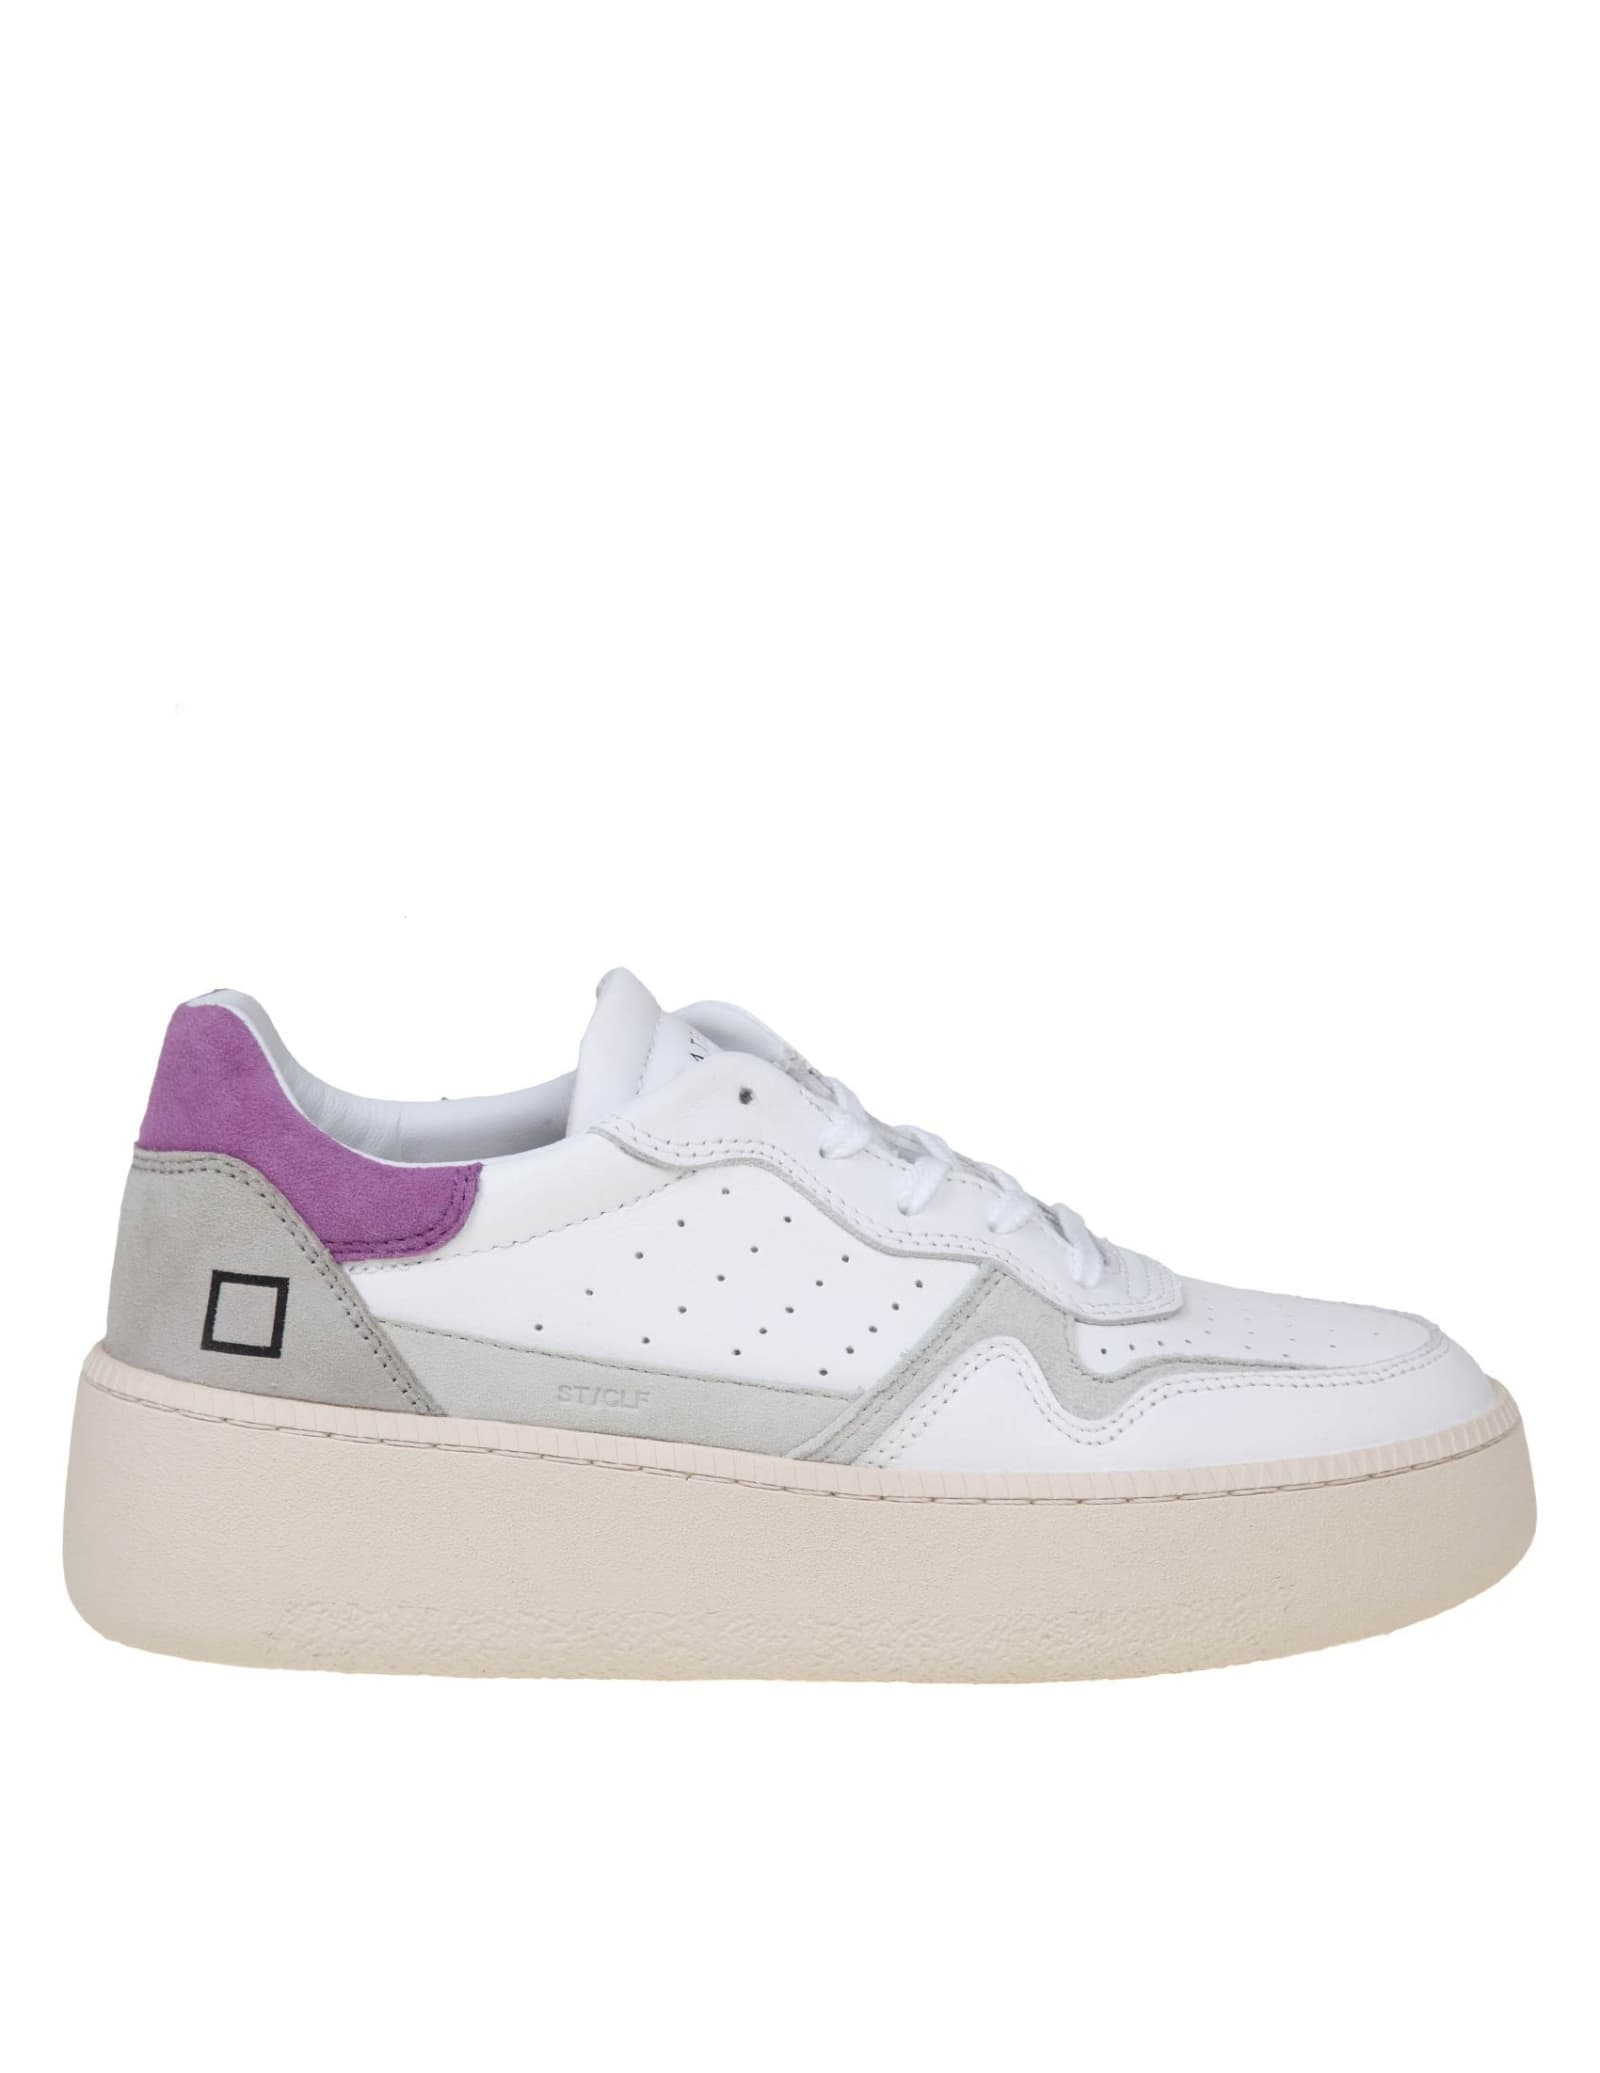 DATE STEP CALF SNEAKERS IN LEATHER AND SUEDE